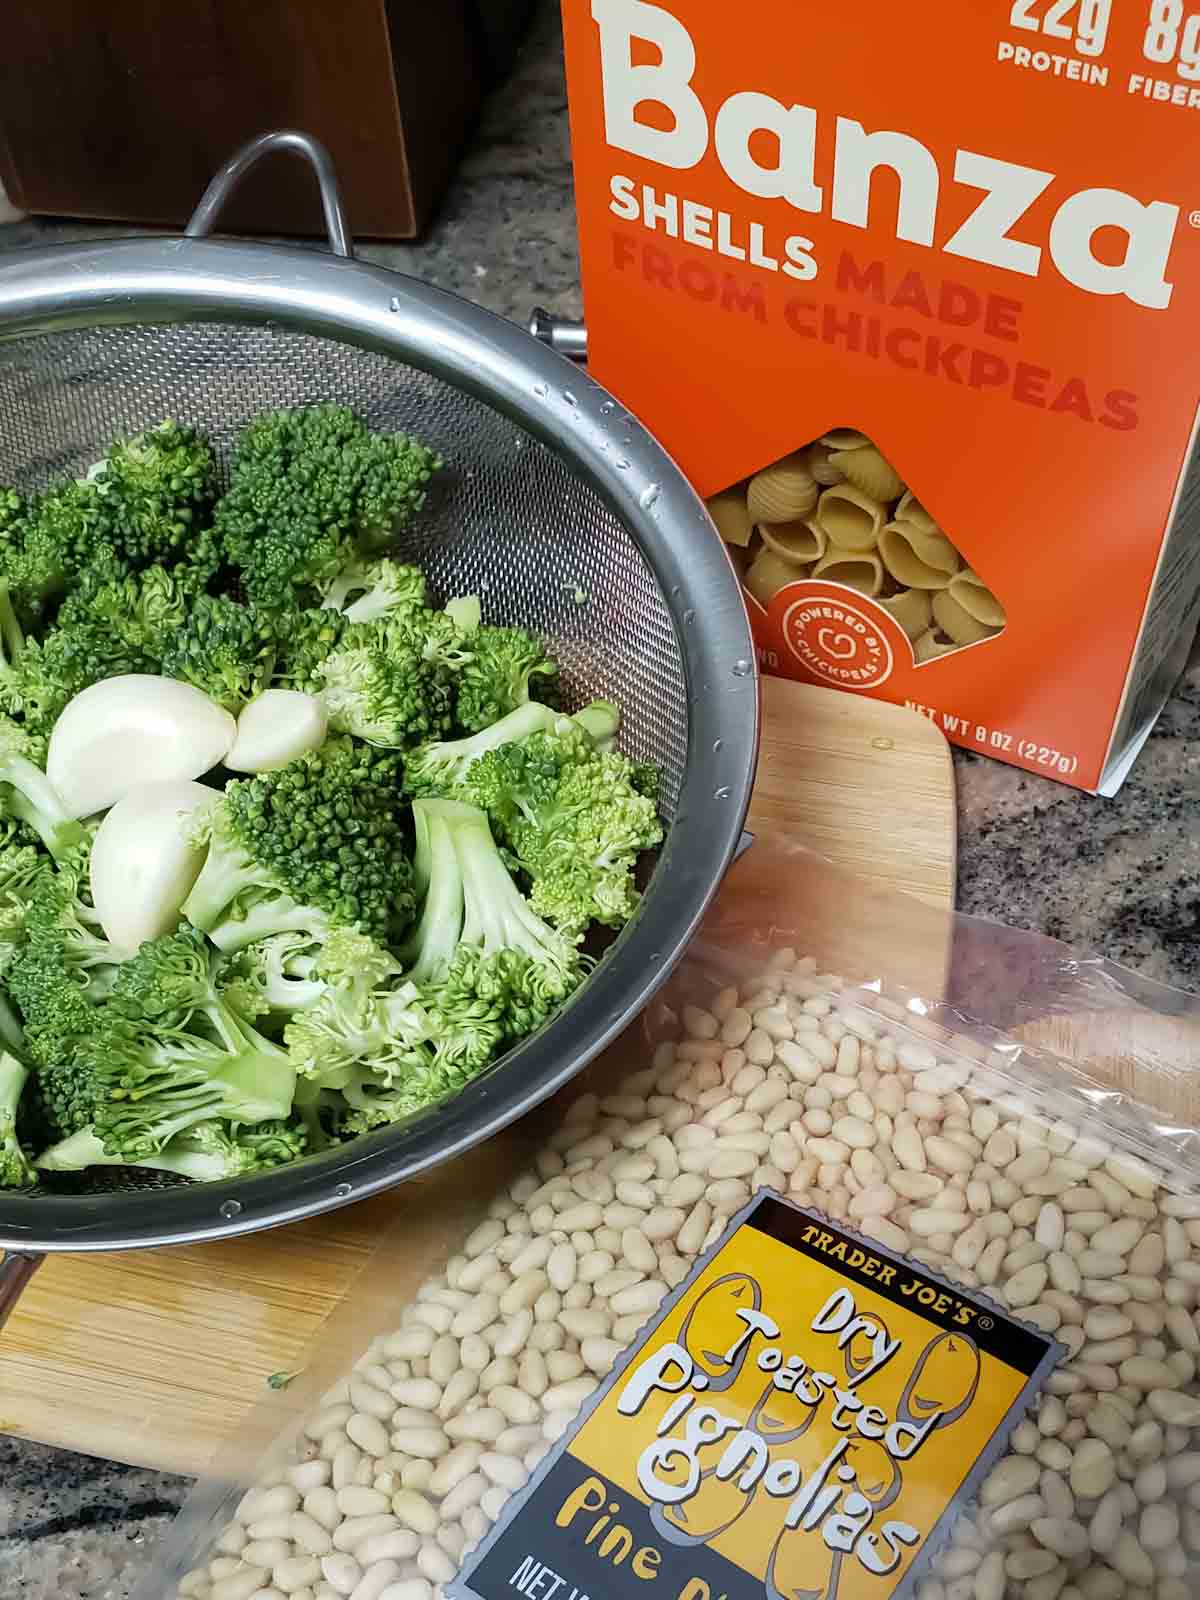 vegan and gluten-free ingredients used in making Banza Chickpea Pasta Recipe.